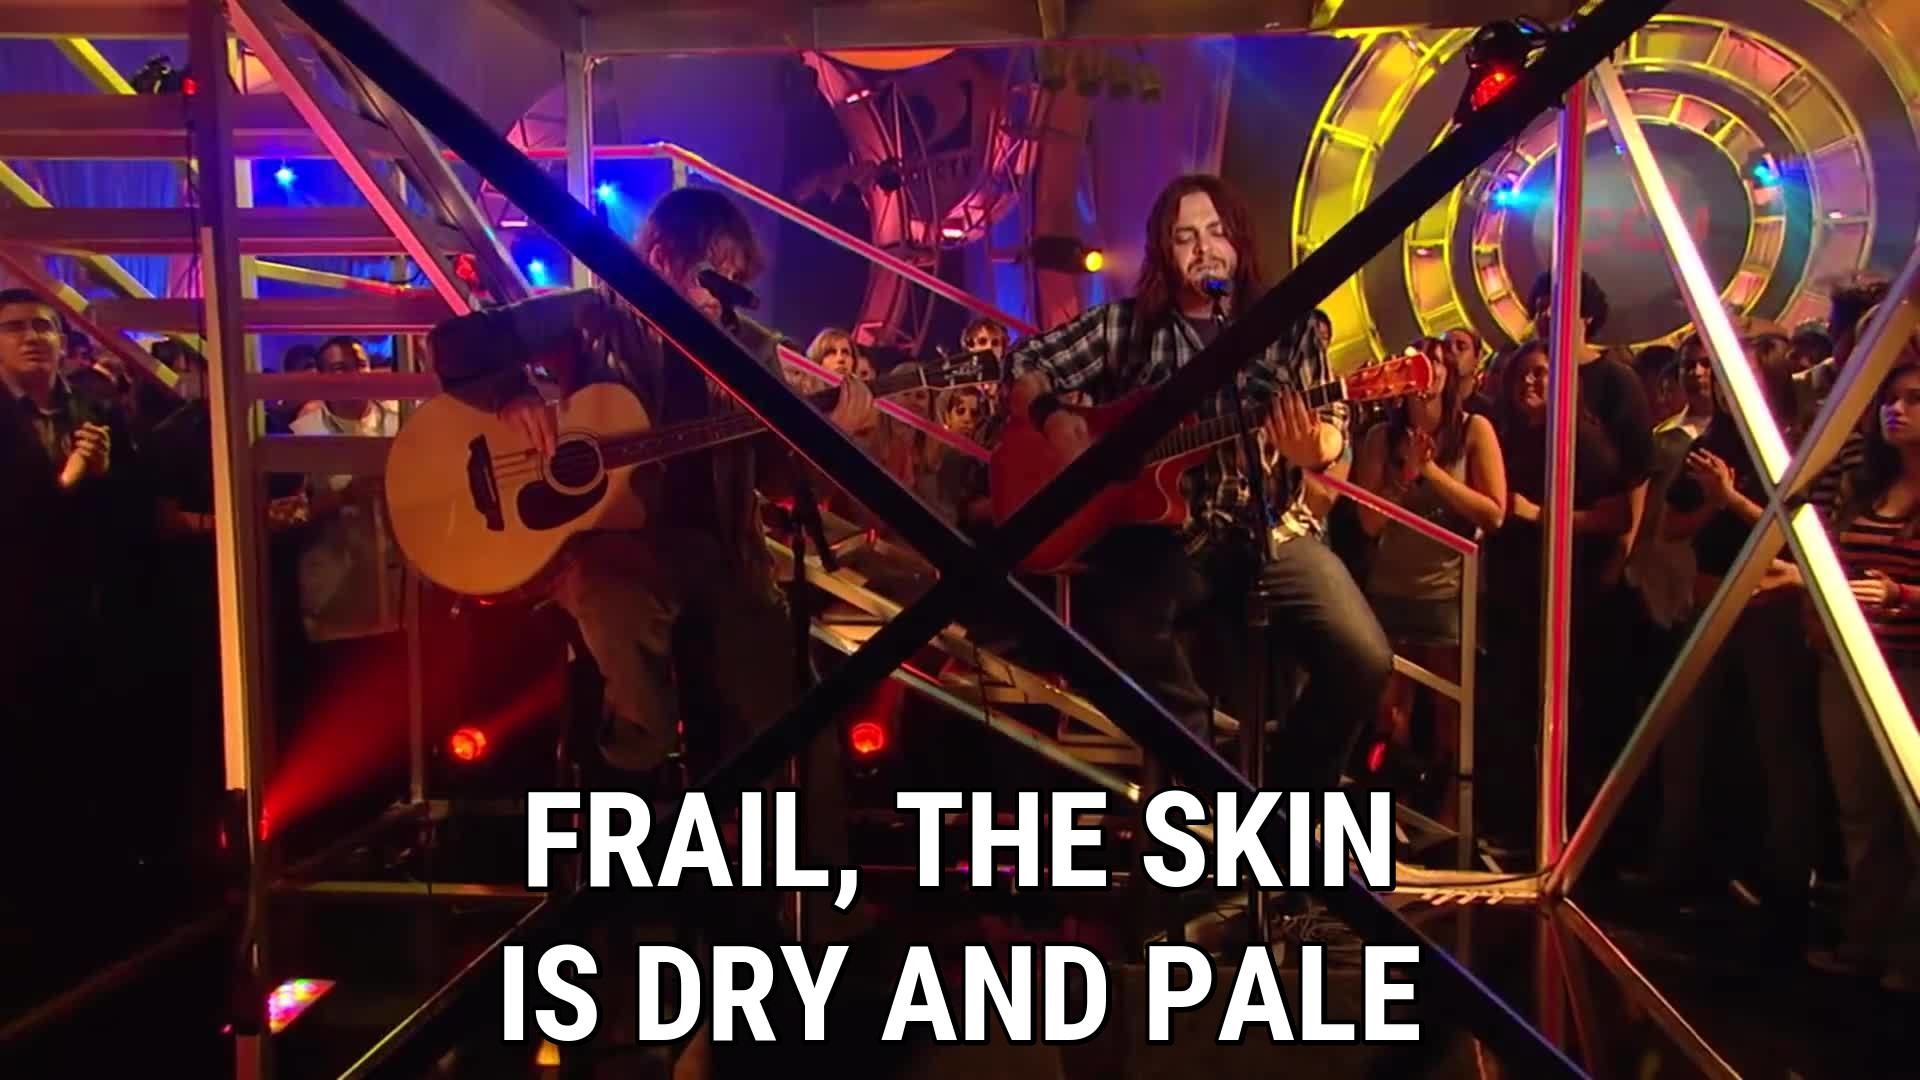 1920x1080 Frail, the skin is dry and pale / Seether